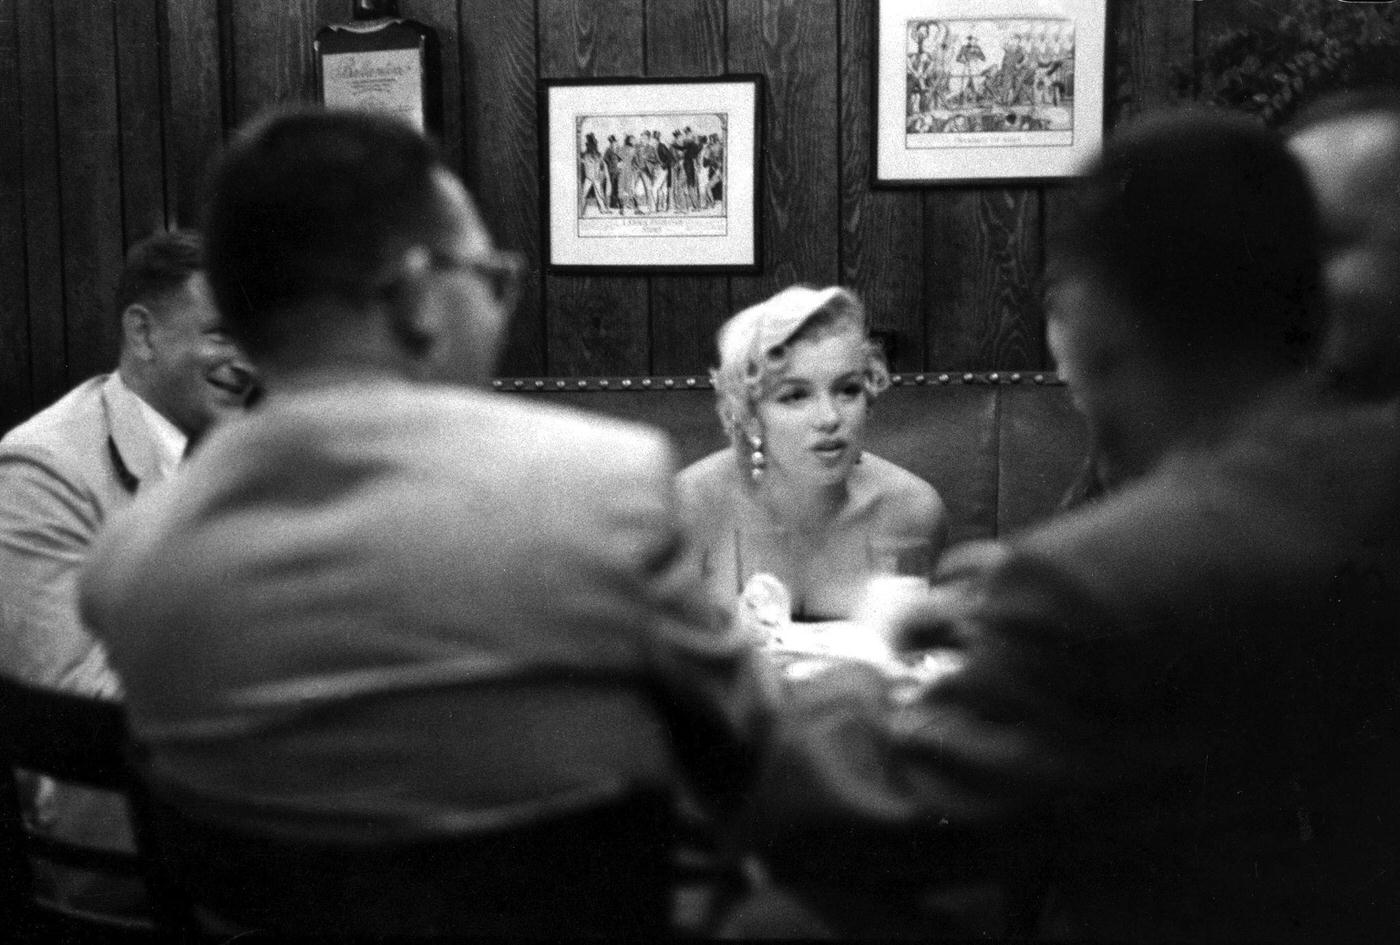 Marilyn Monroe at a press party for "The Seven Year Itch" at the '21' Club in 1954 in New York